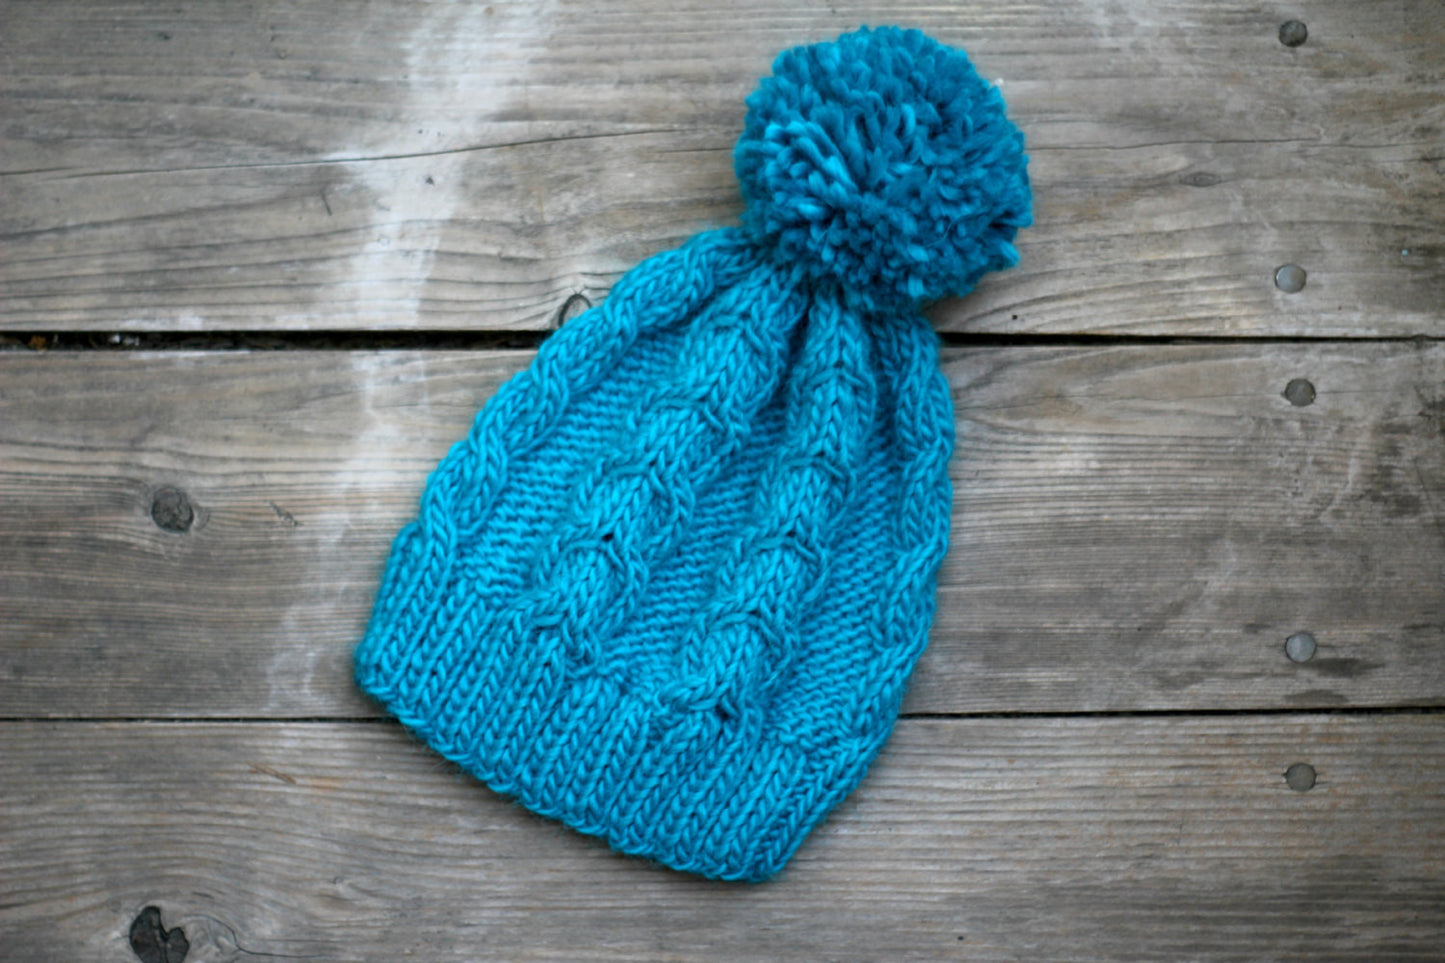 Knit cable hat